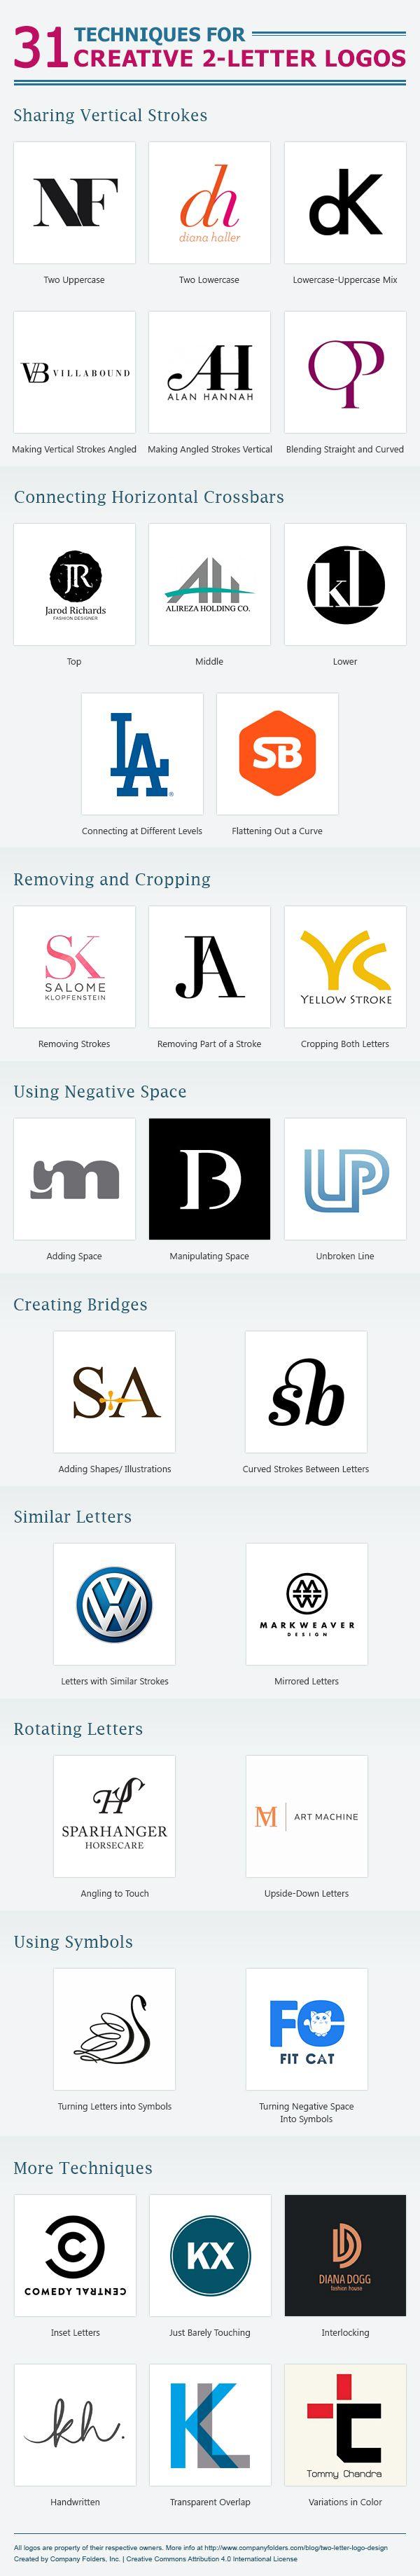 Two- Letter Logo - Useful Design Techniques For Creative Two Letter Logos